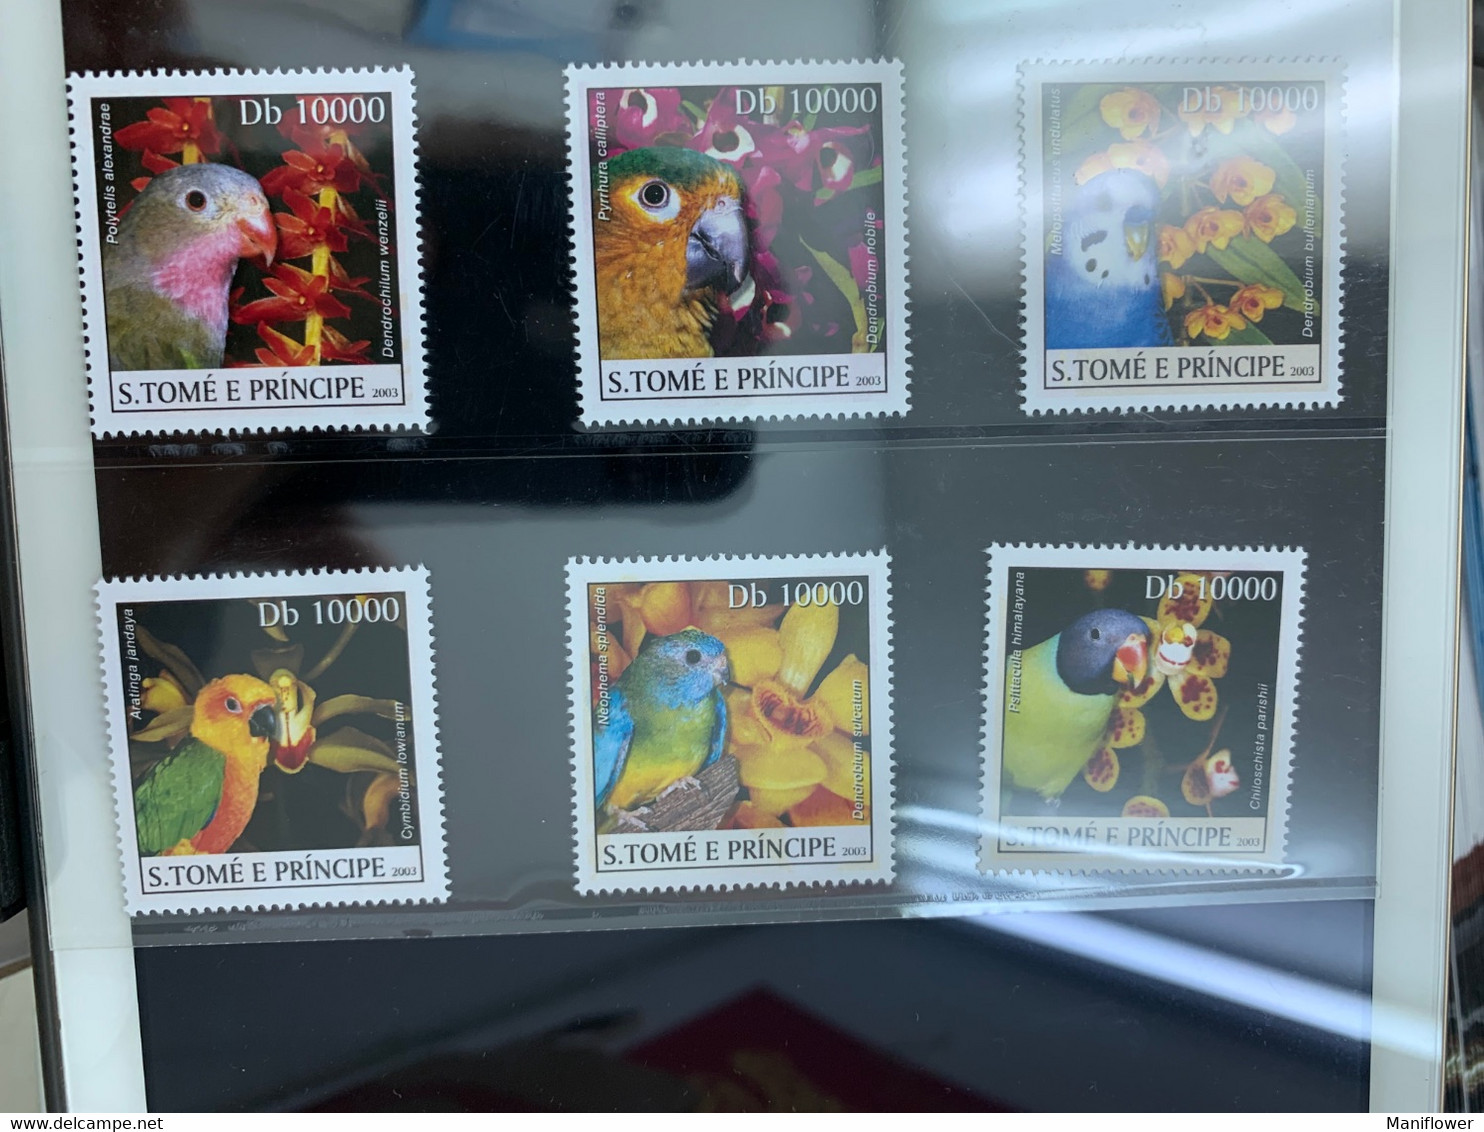 Parrots Orchids S. Tome E. Principe Stamp From Hong Kong MNH - Covers & Documents